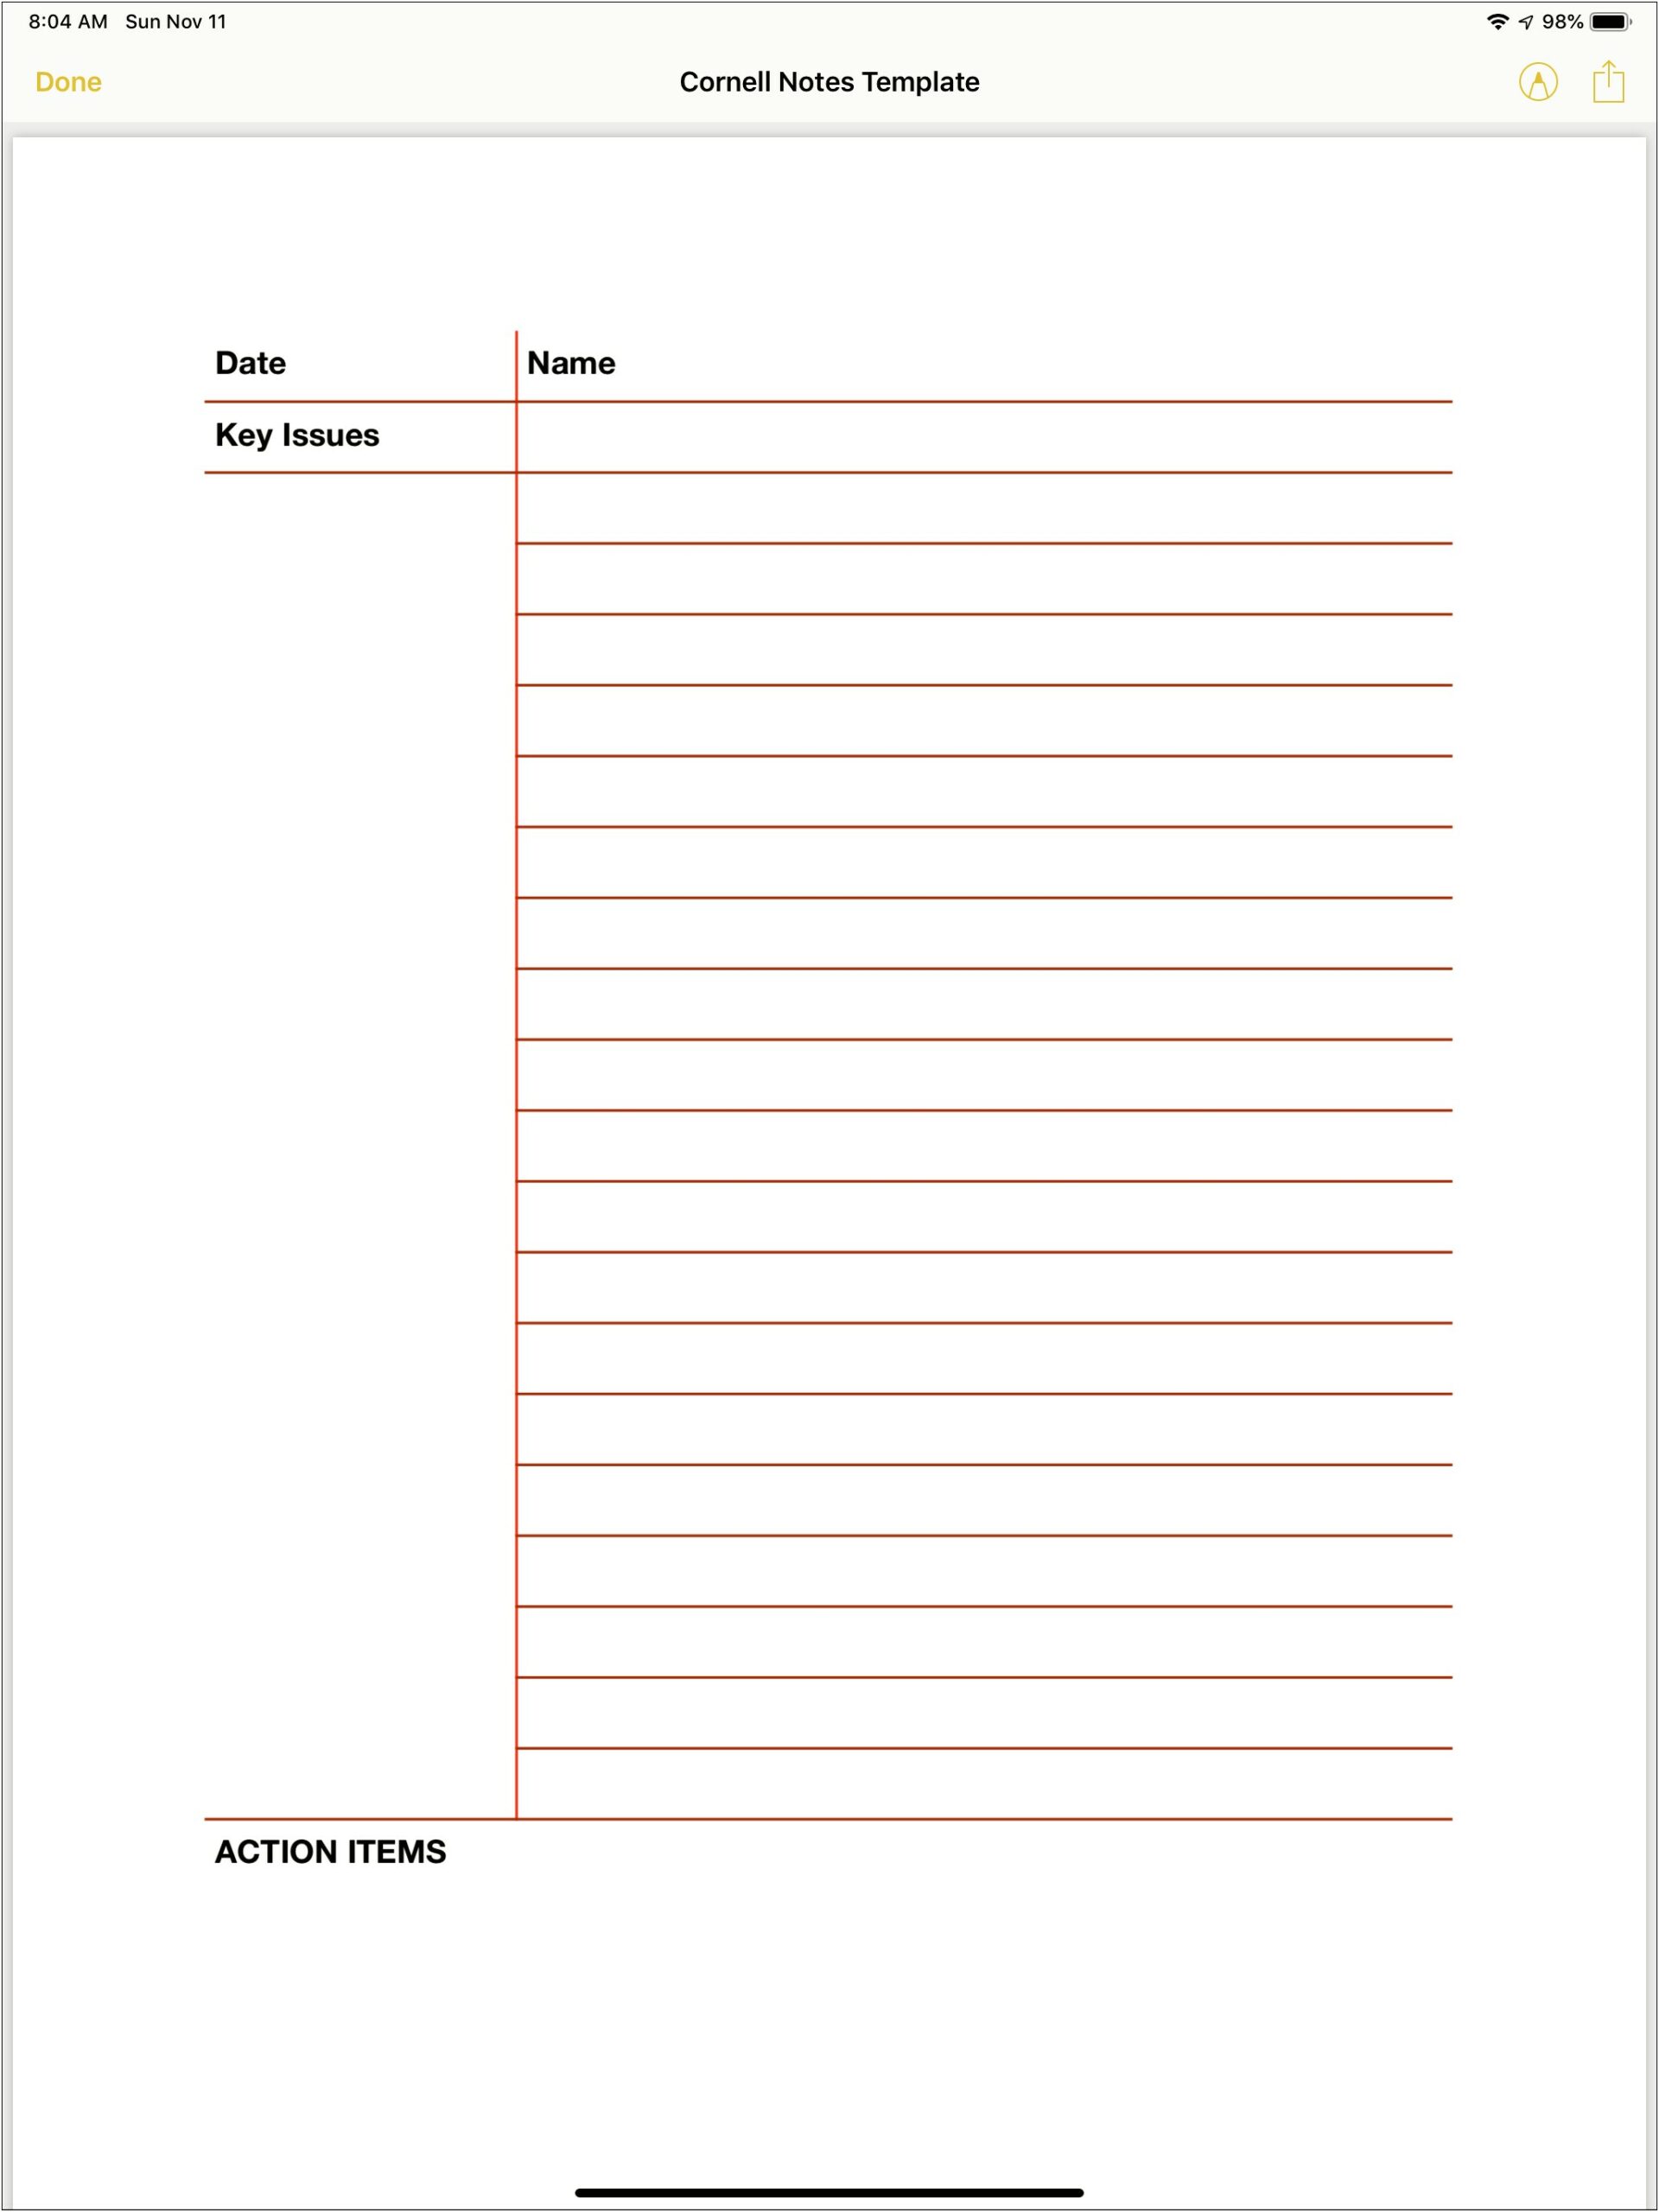 Cornell Note Taking Template Word Mac